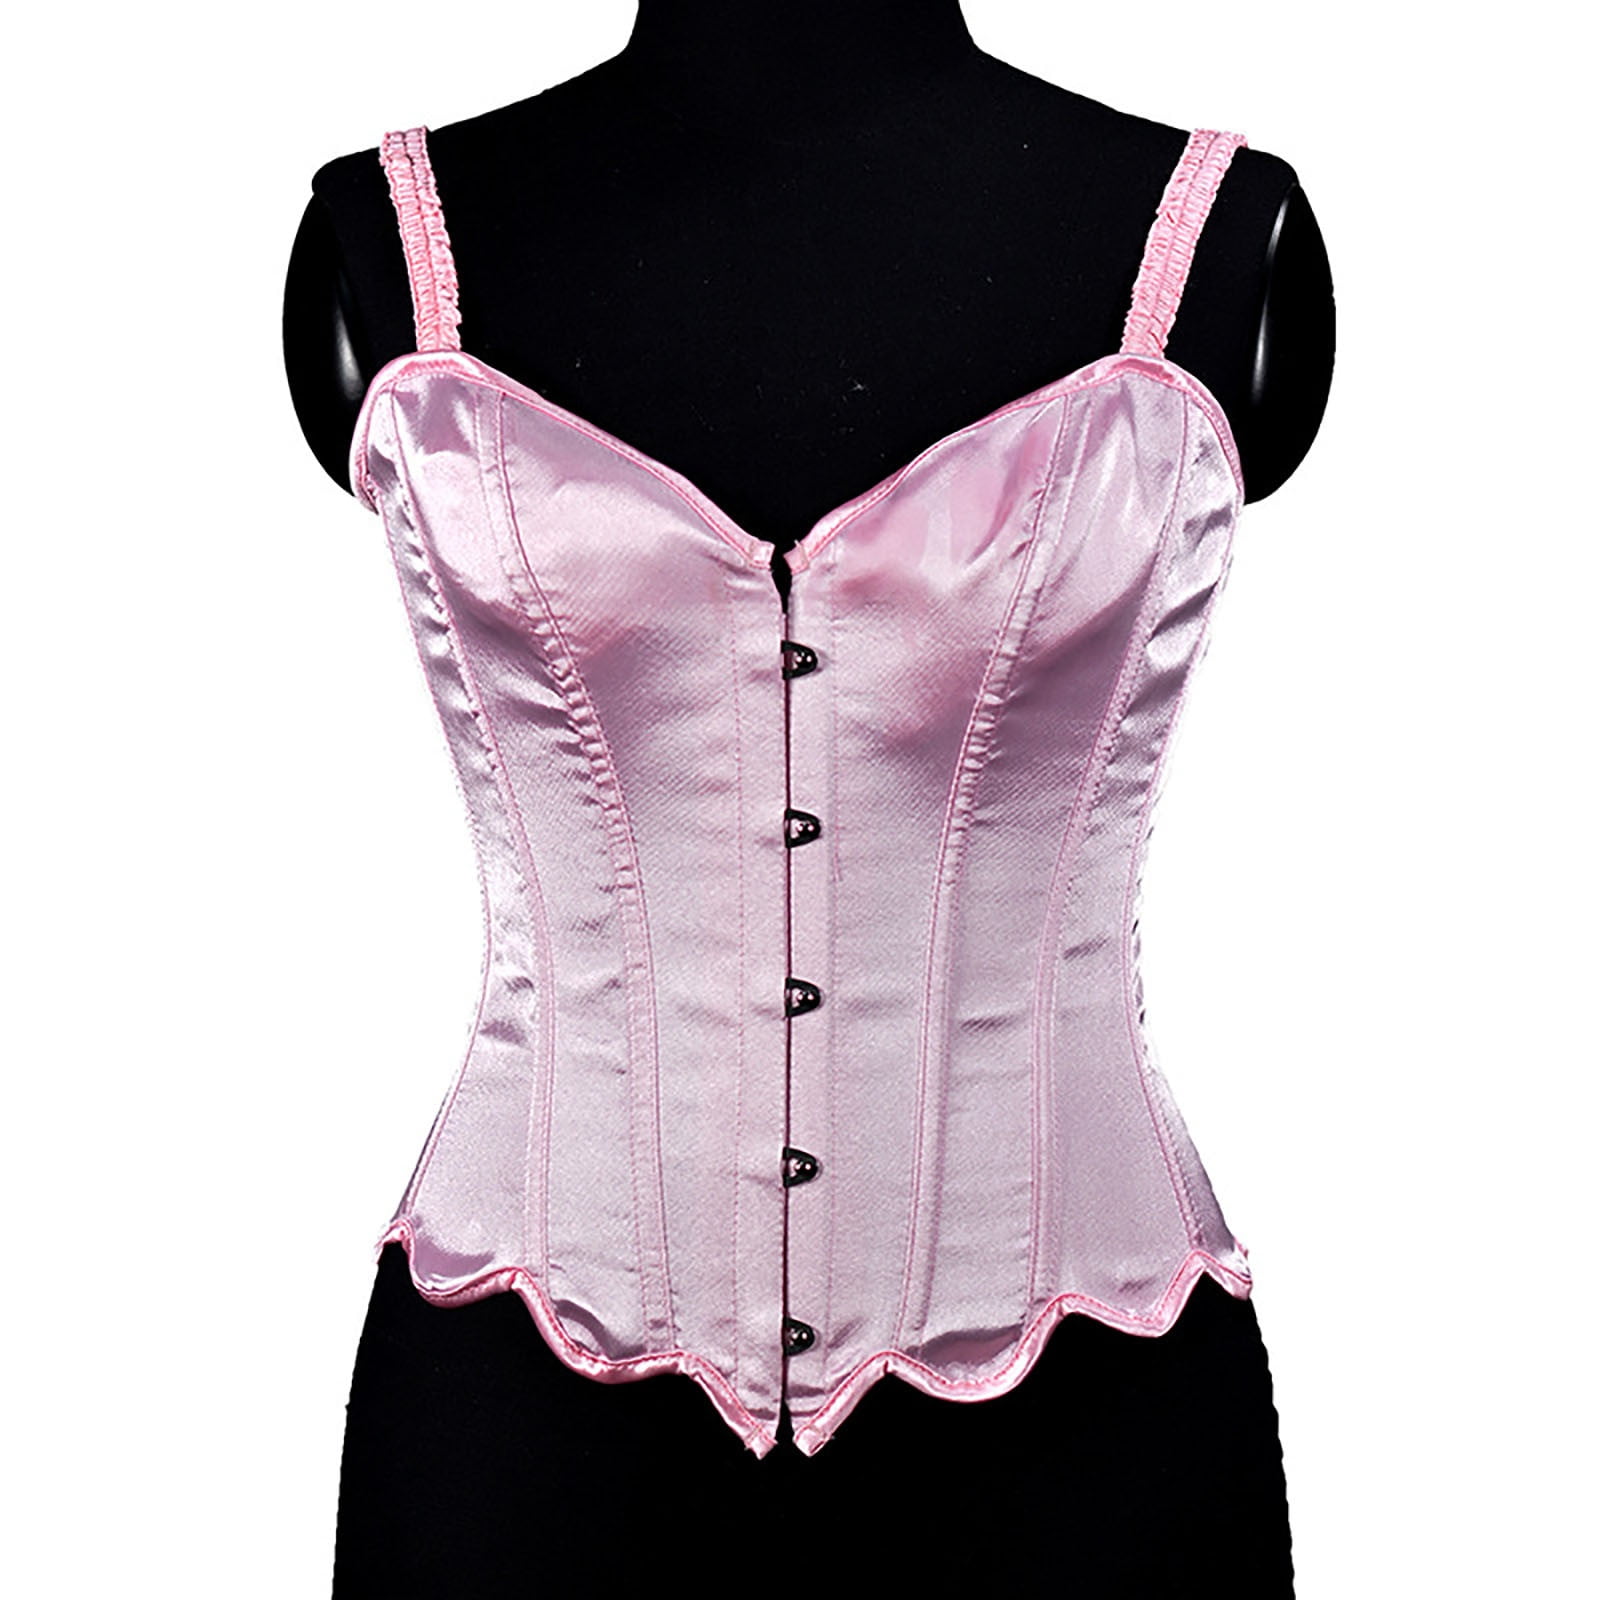 Satin Hook and Eye Corset Top (Available in Pink, Green, and Black)